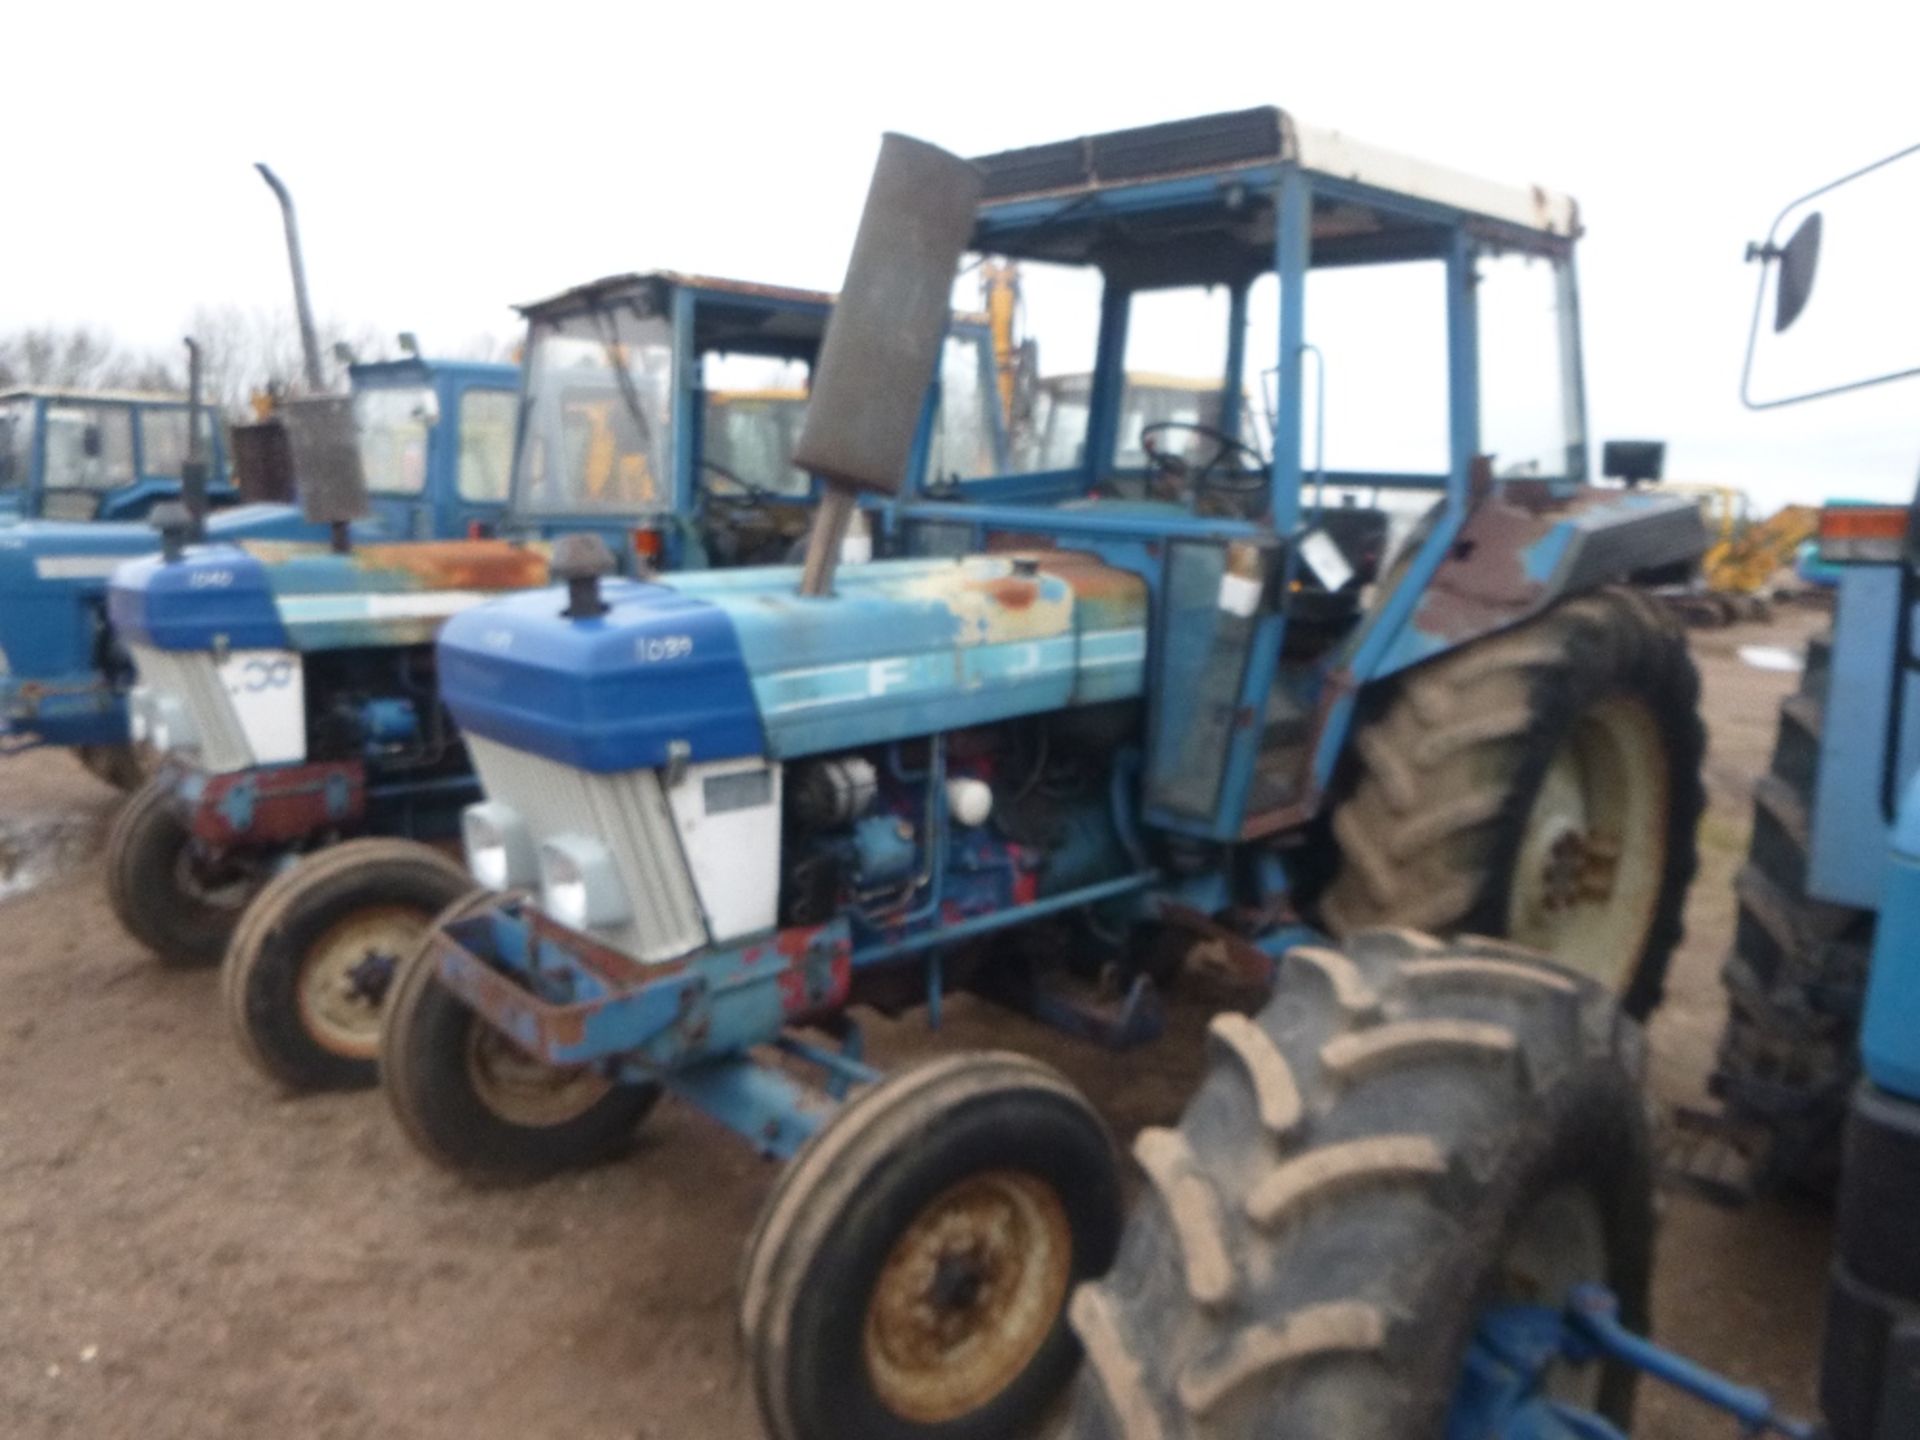 Ford 5610 2wd Tractor with Floor Change Gearbox. Reg. No. B621 UOW Ser. No. BA22021